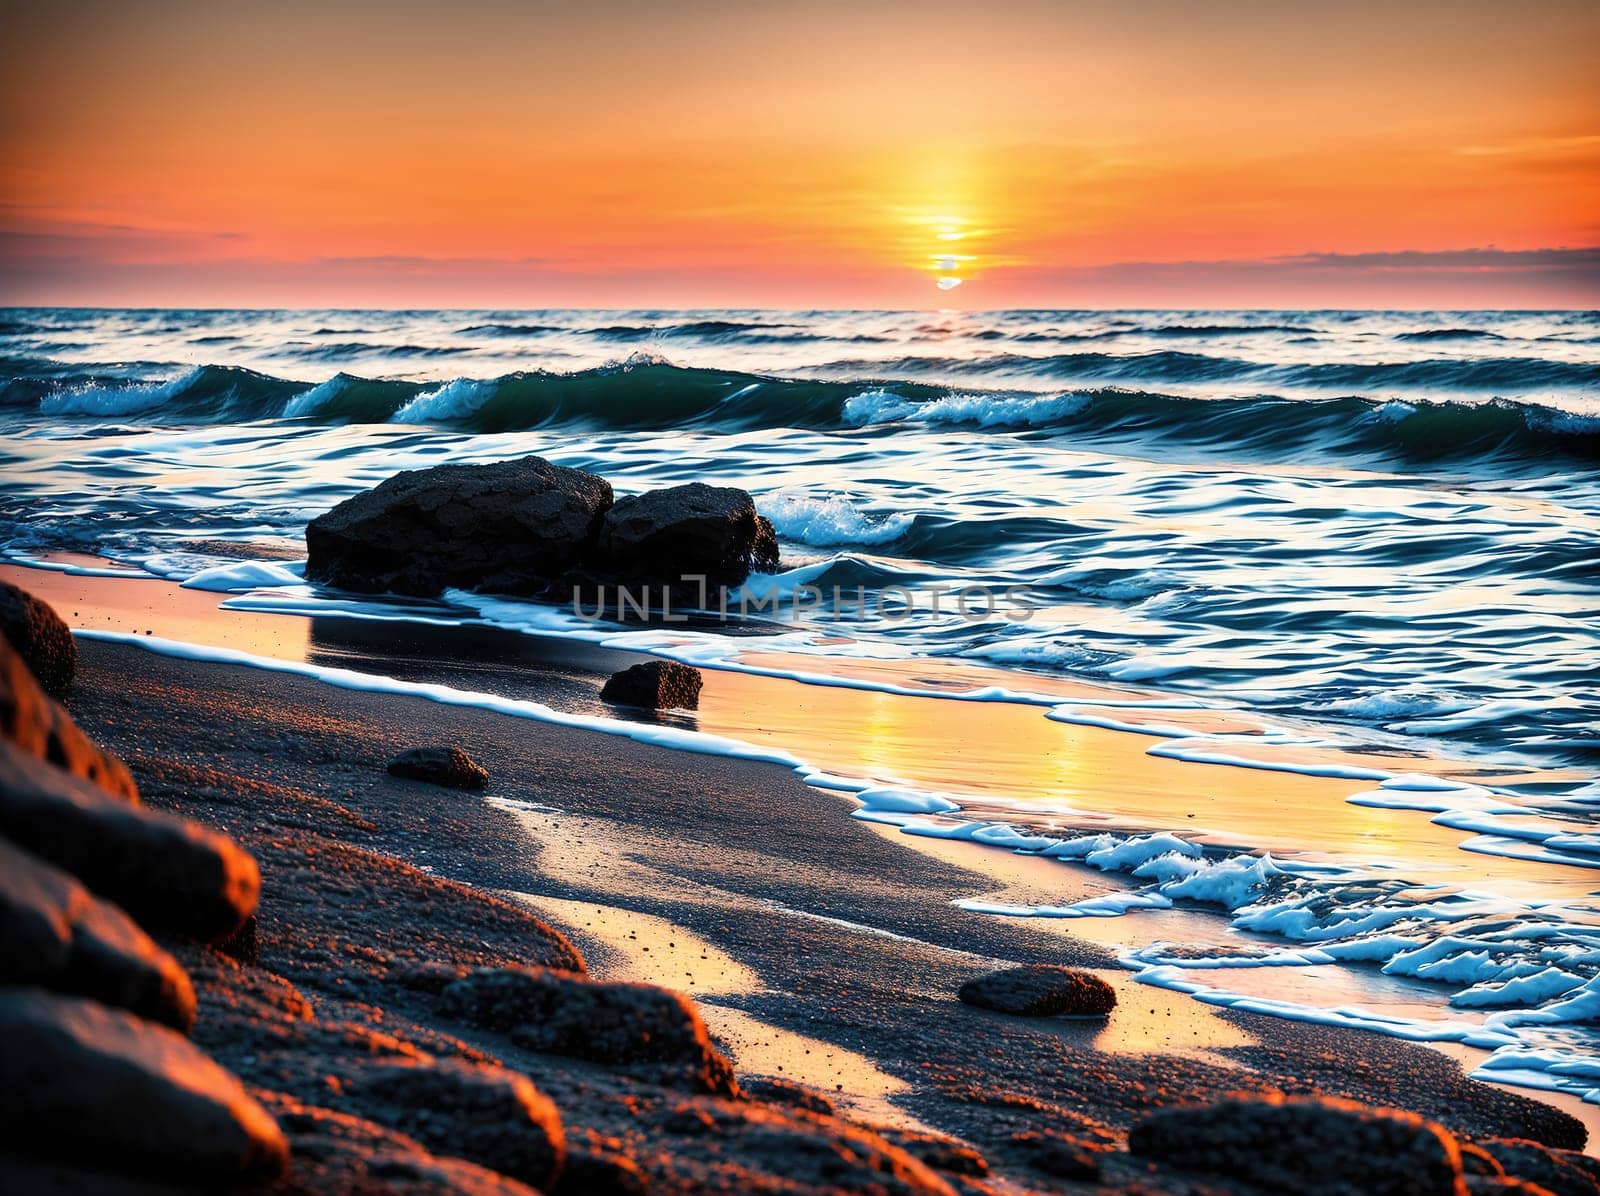 The image shows a sunset over the ocean with rocks and sand on the beach.